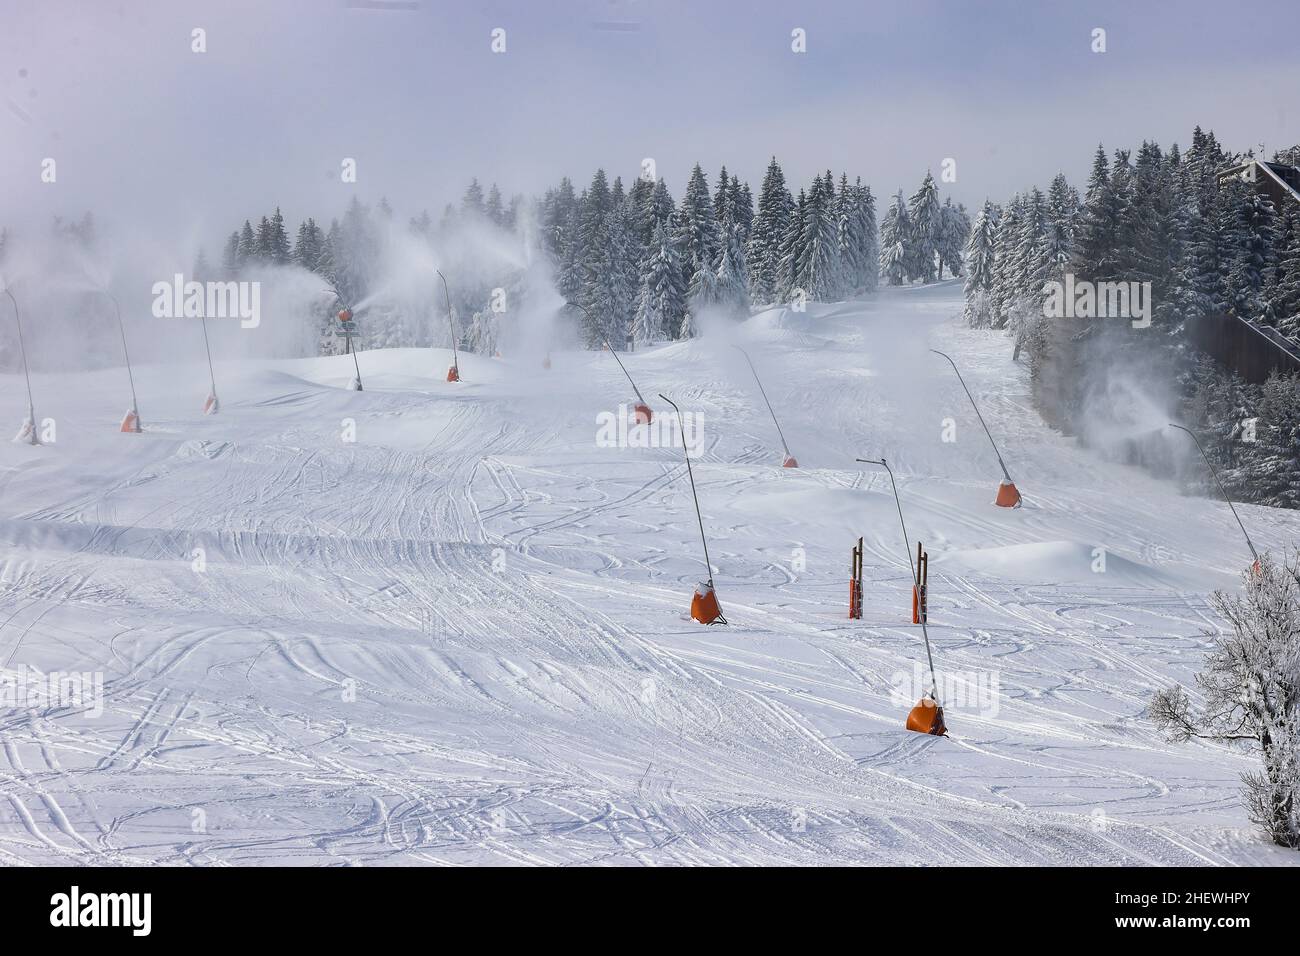 12 January 2022, Saxony, Oberwiesenthal: From numerous lances the slope at the long drag lift is covered with snow. On Saturday (15.01.), this year's ski season will be officially ushered in at Fichtelberg. Due to Corona, the ski area is only open to vaccinated and recovered skiers (2G); a mask must be worn when queuing at the lift and in the lift itself. The 2G status will be checked before purchasing the ski pass as well as in the ski area. For this purpose, a control point and a central sales point for lift tickets will be set up in the parking lot of the Fichtelberg cable car. Photo: Jan W Stock Photo